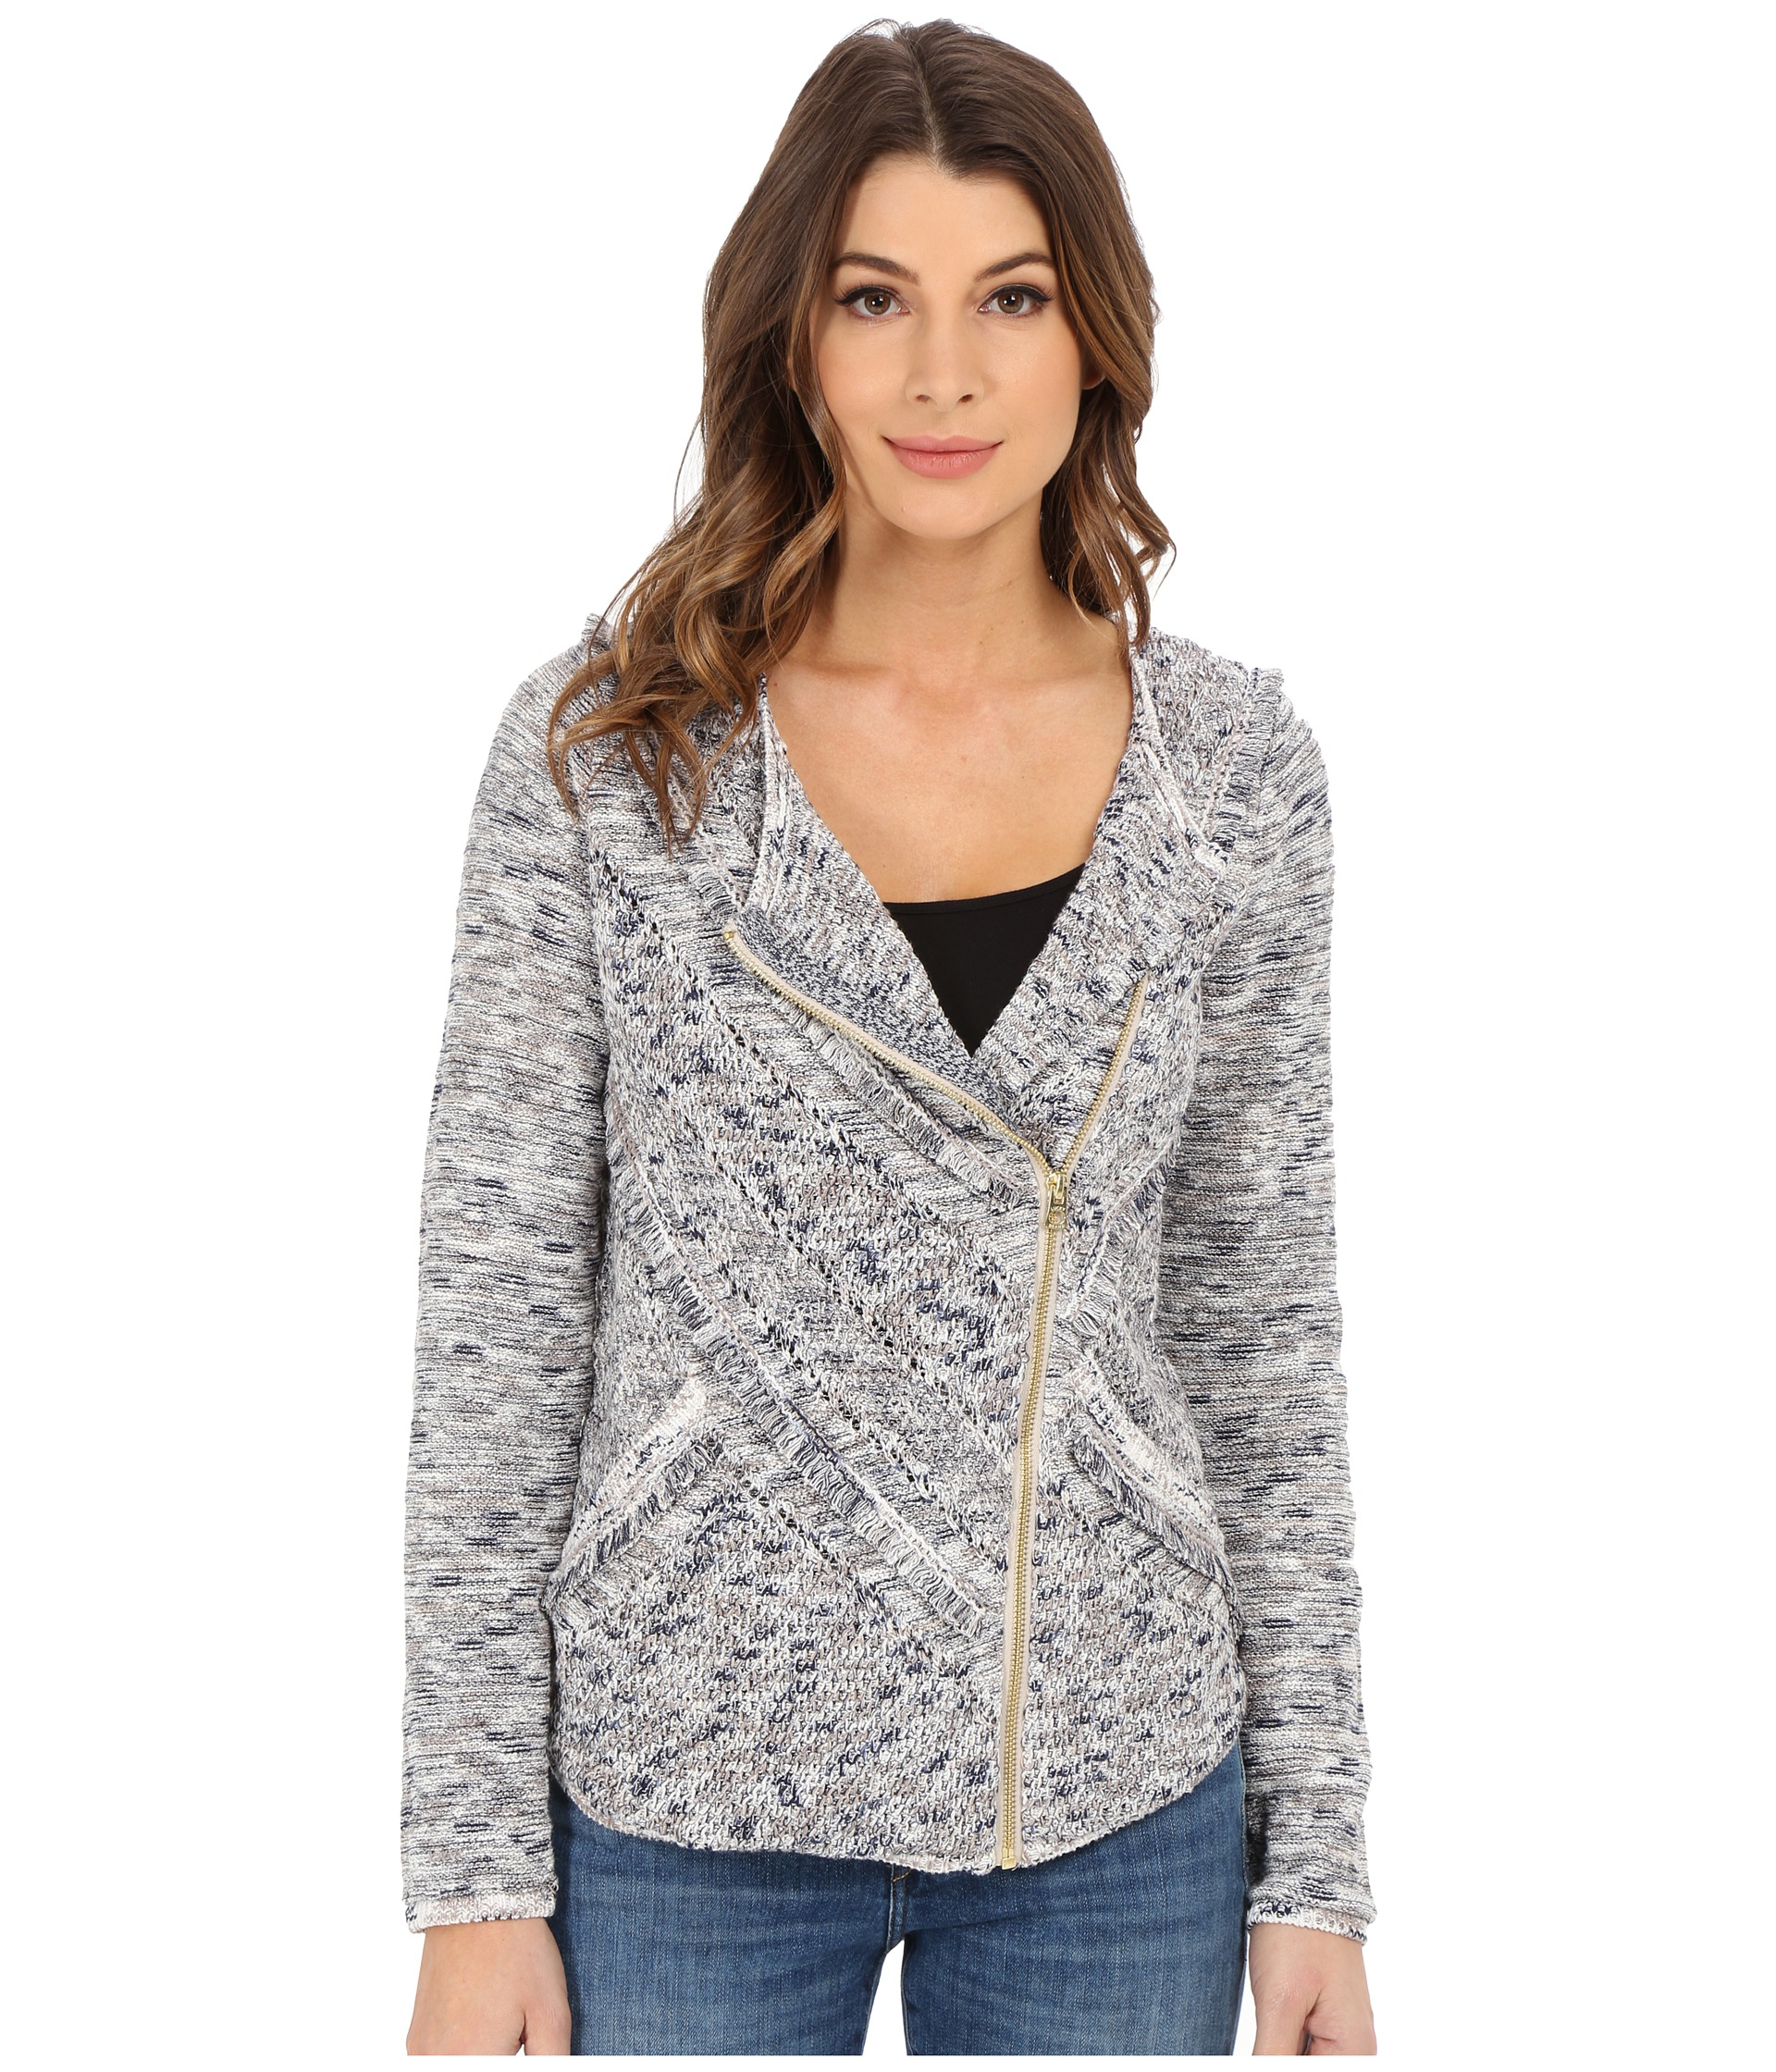 Lyst - Lucky Brand Fringe Sweater Jacket in Gray